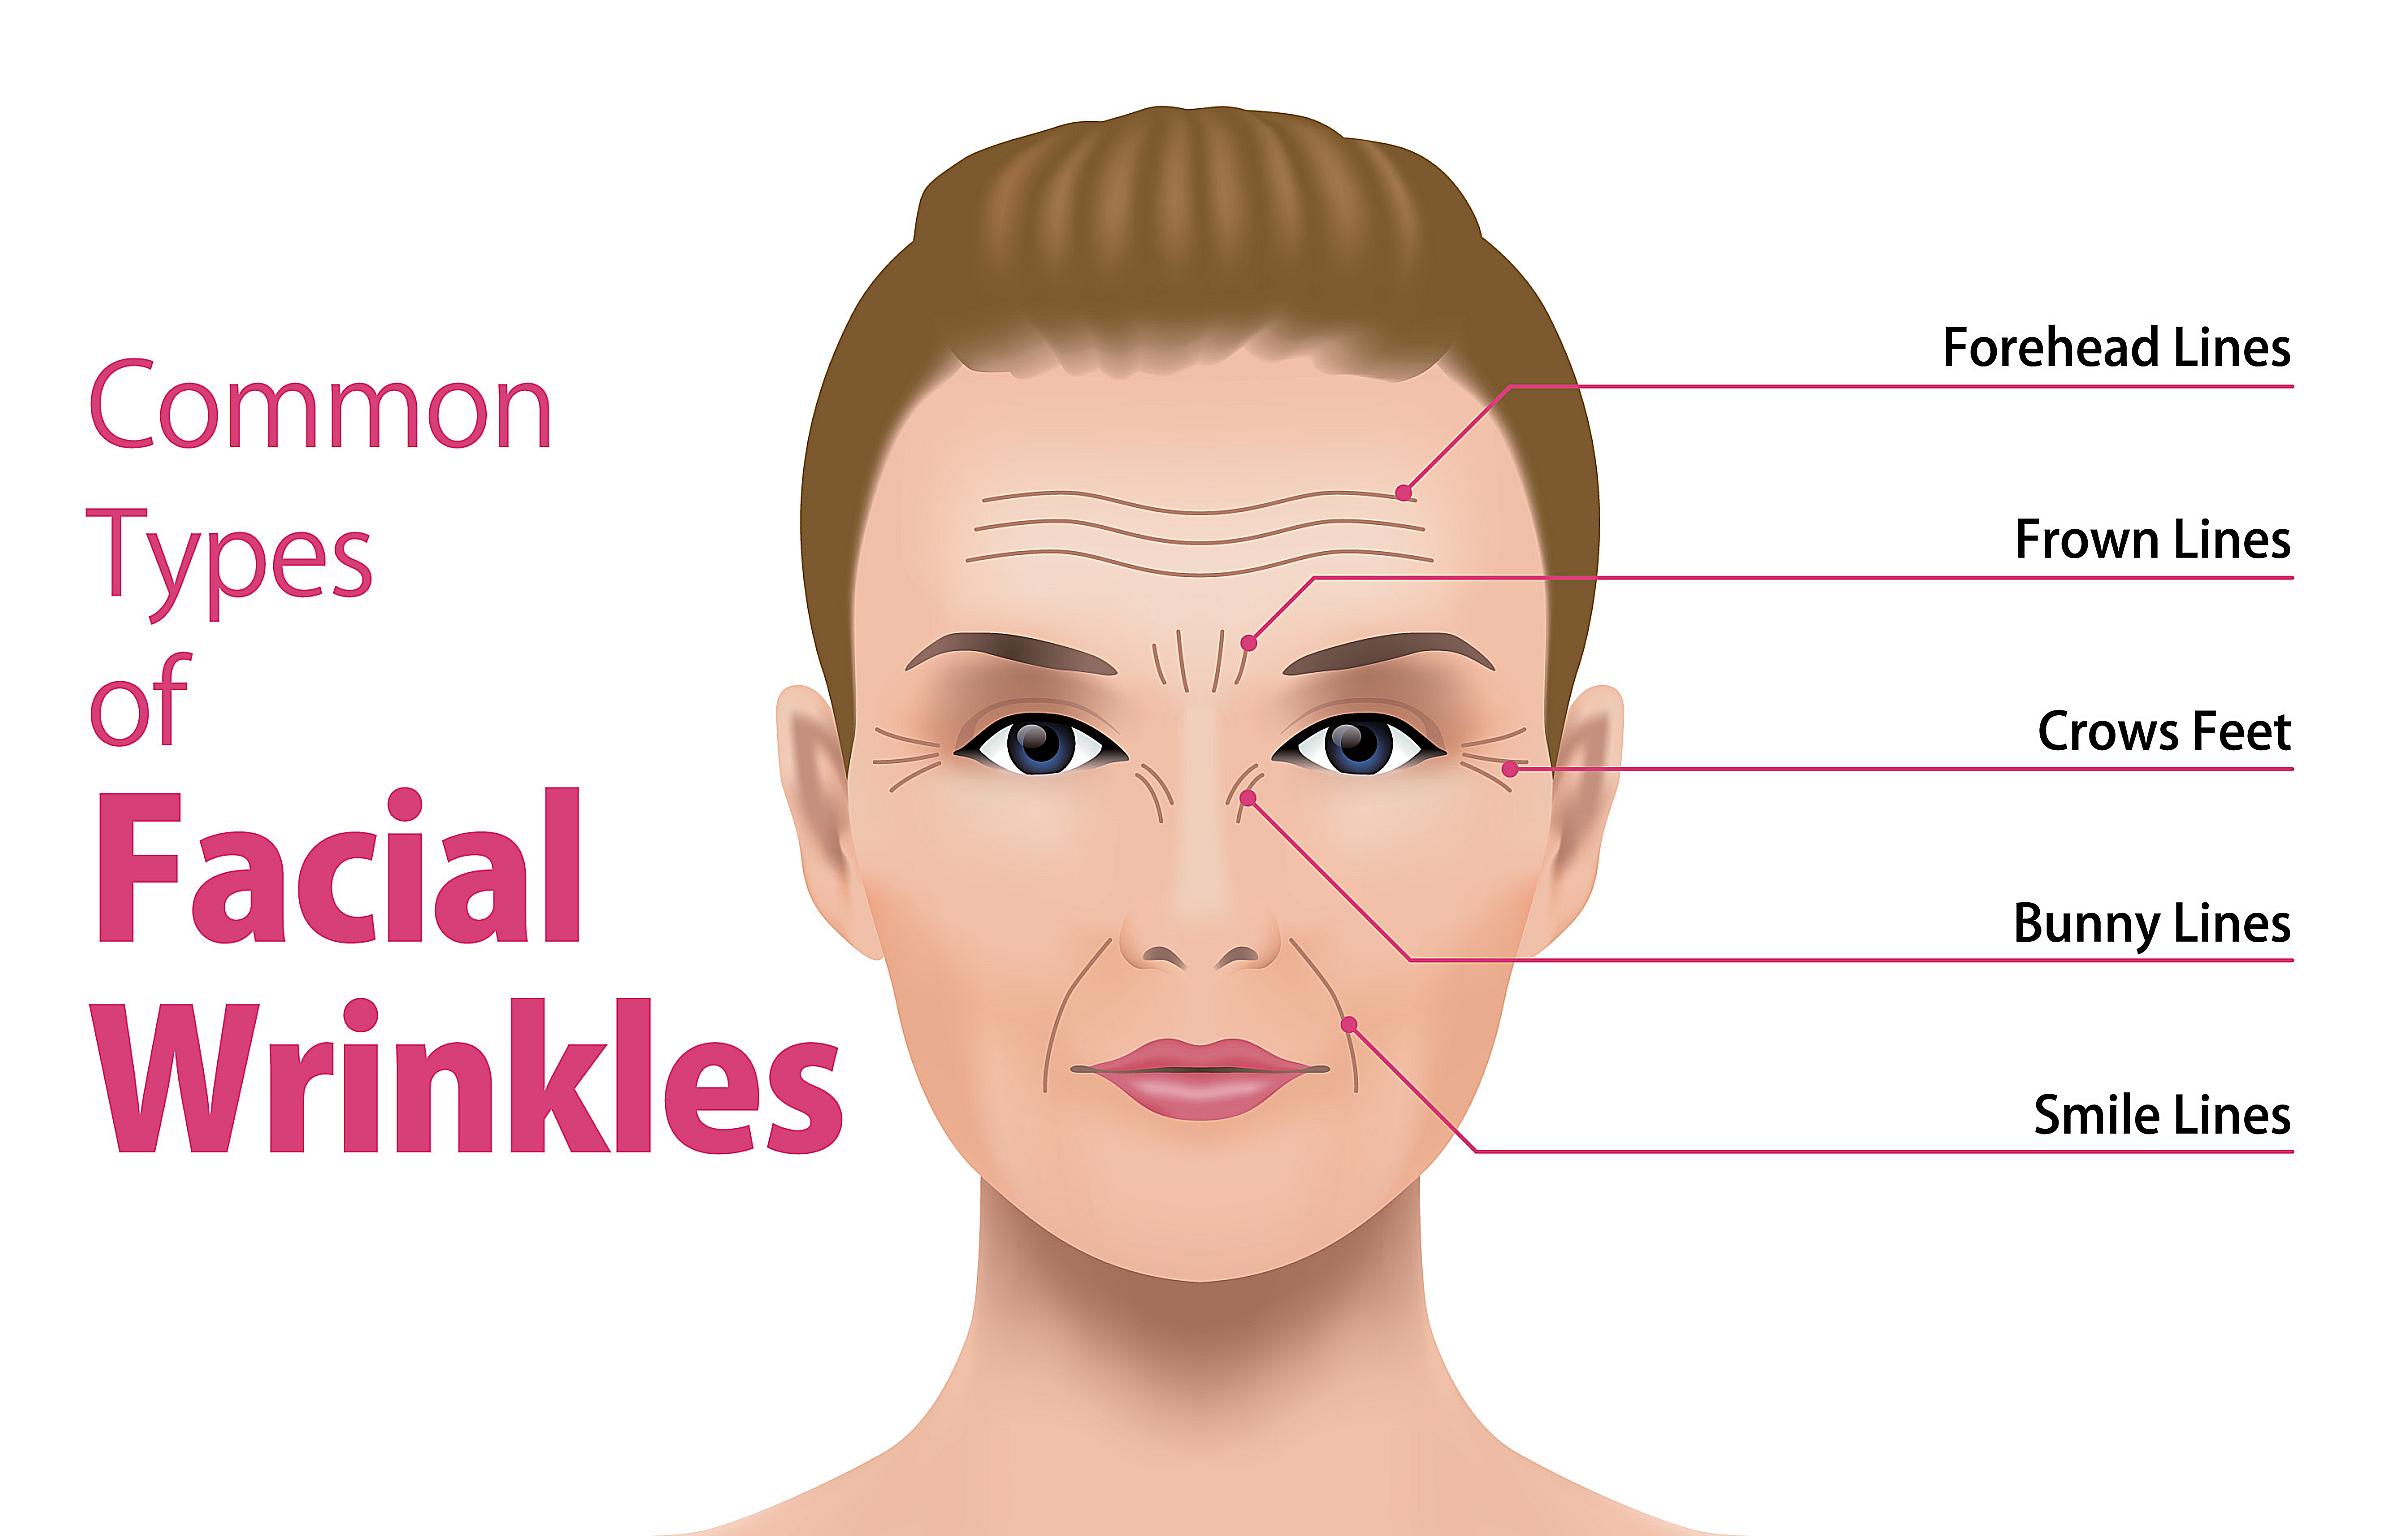 Facial wrinkles that are good options for Botox or other neuromodulators